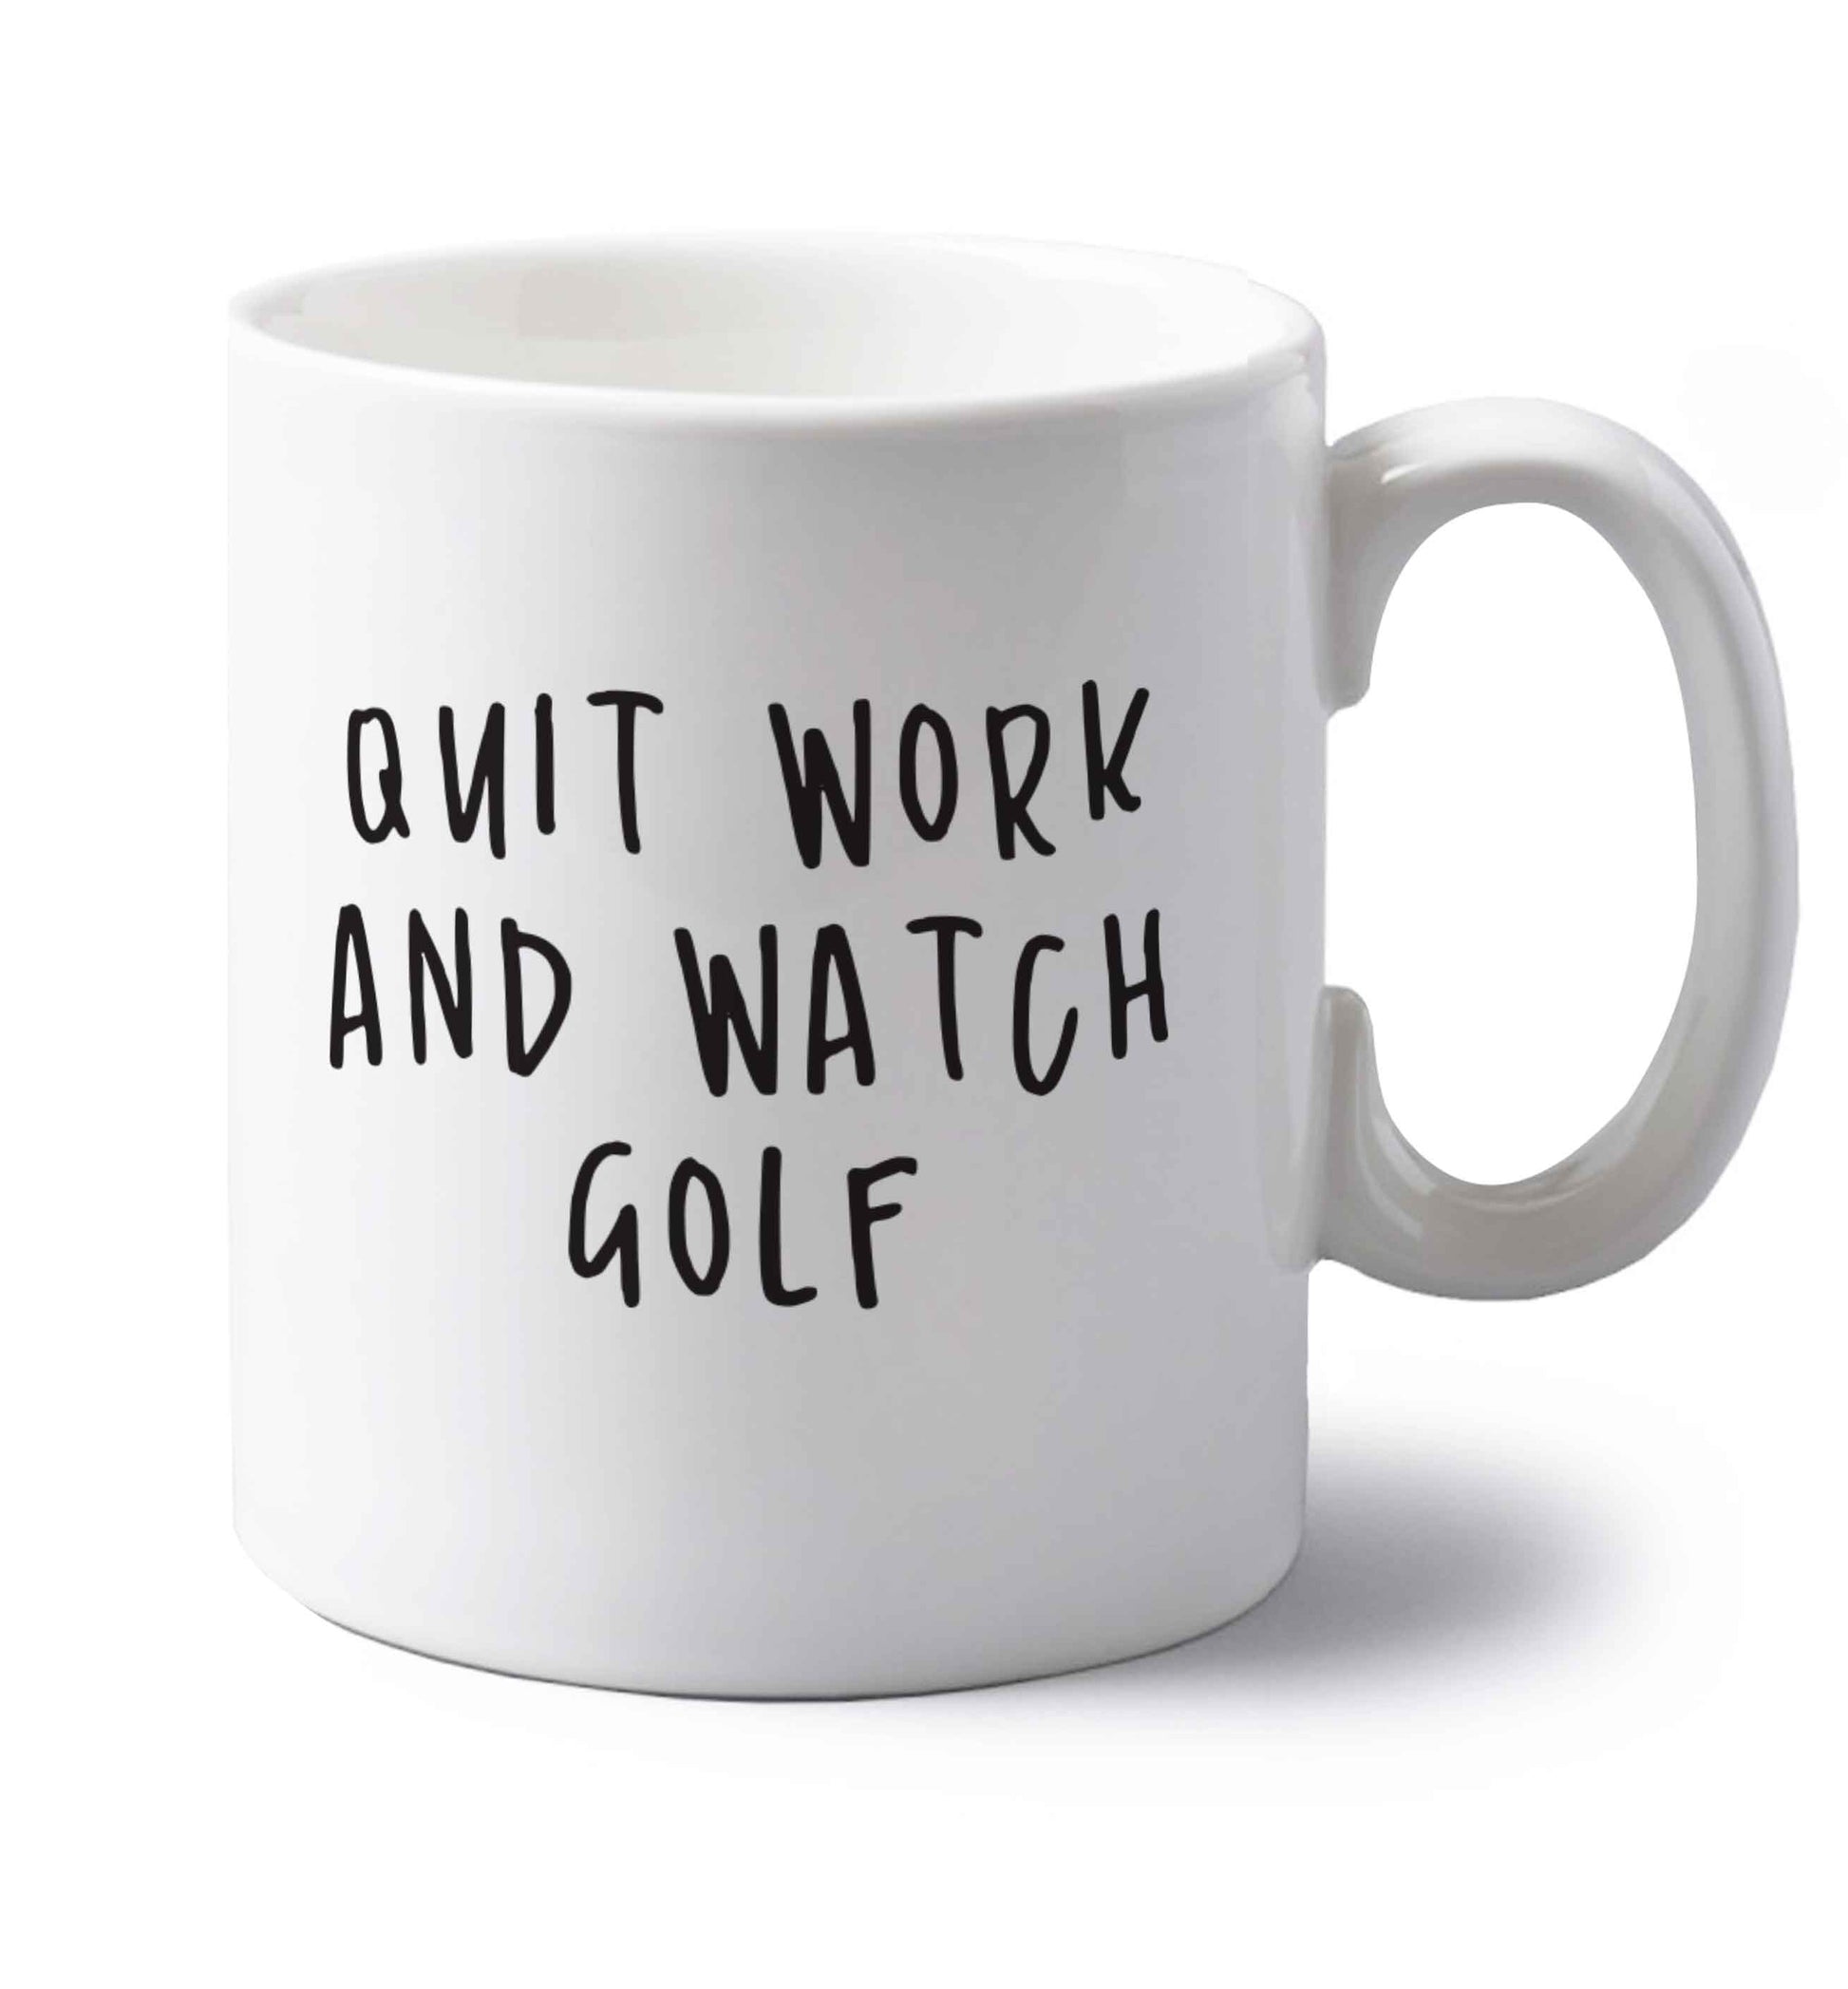 Quit work and watch golf left handed white ceramic mug 